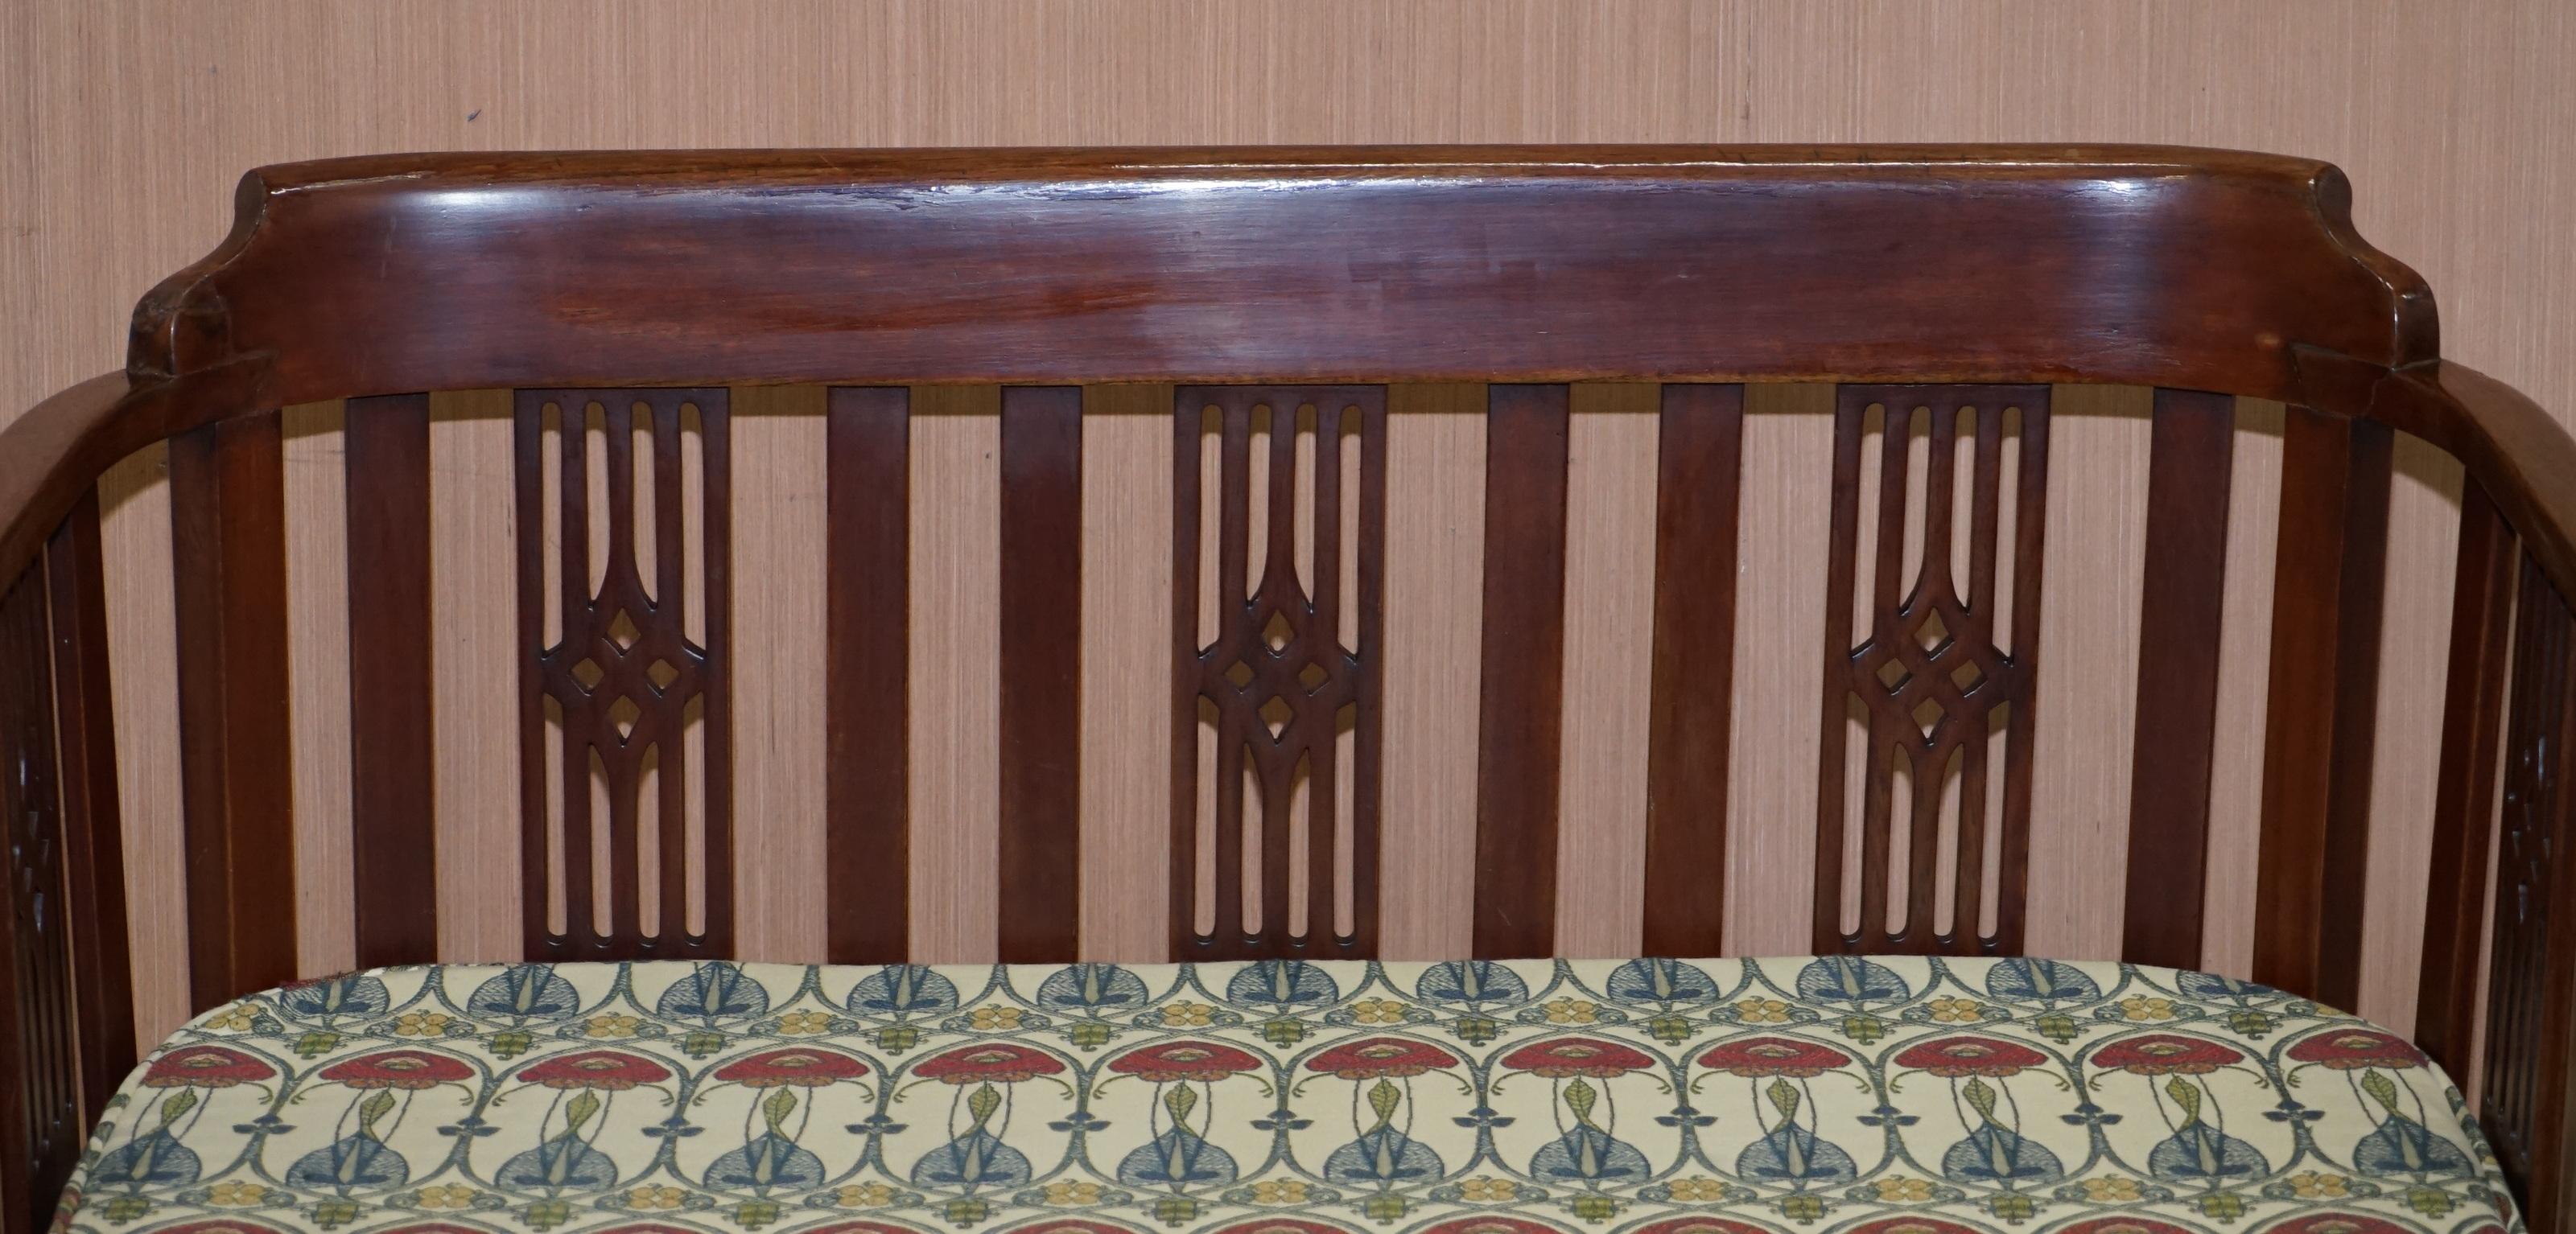 Hand-Crafted Charles Rennie Mackintosh Art Nouveau upholstered 2 seat bench sofa berger seat